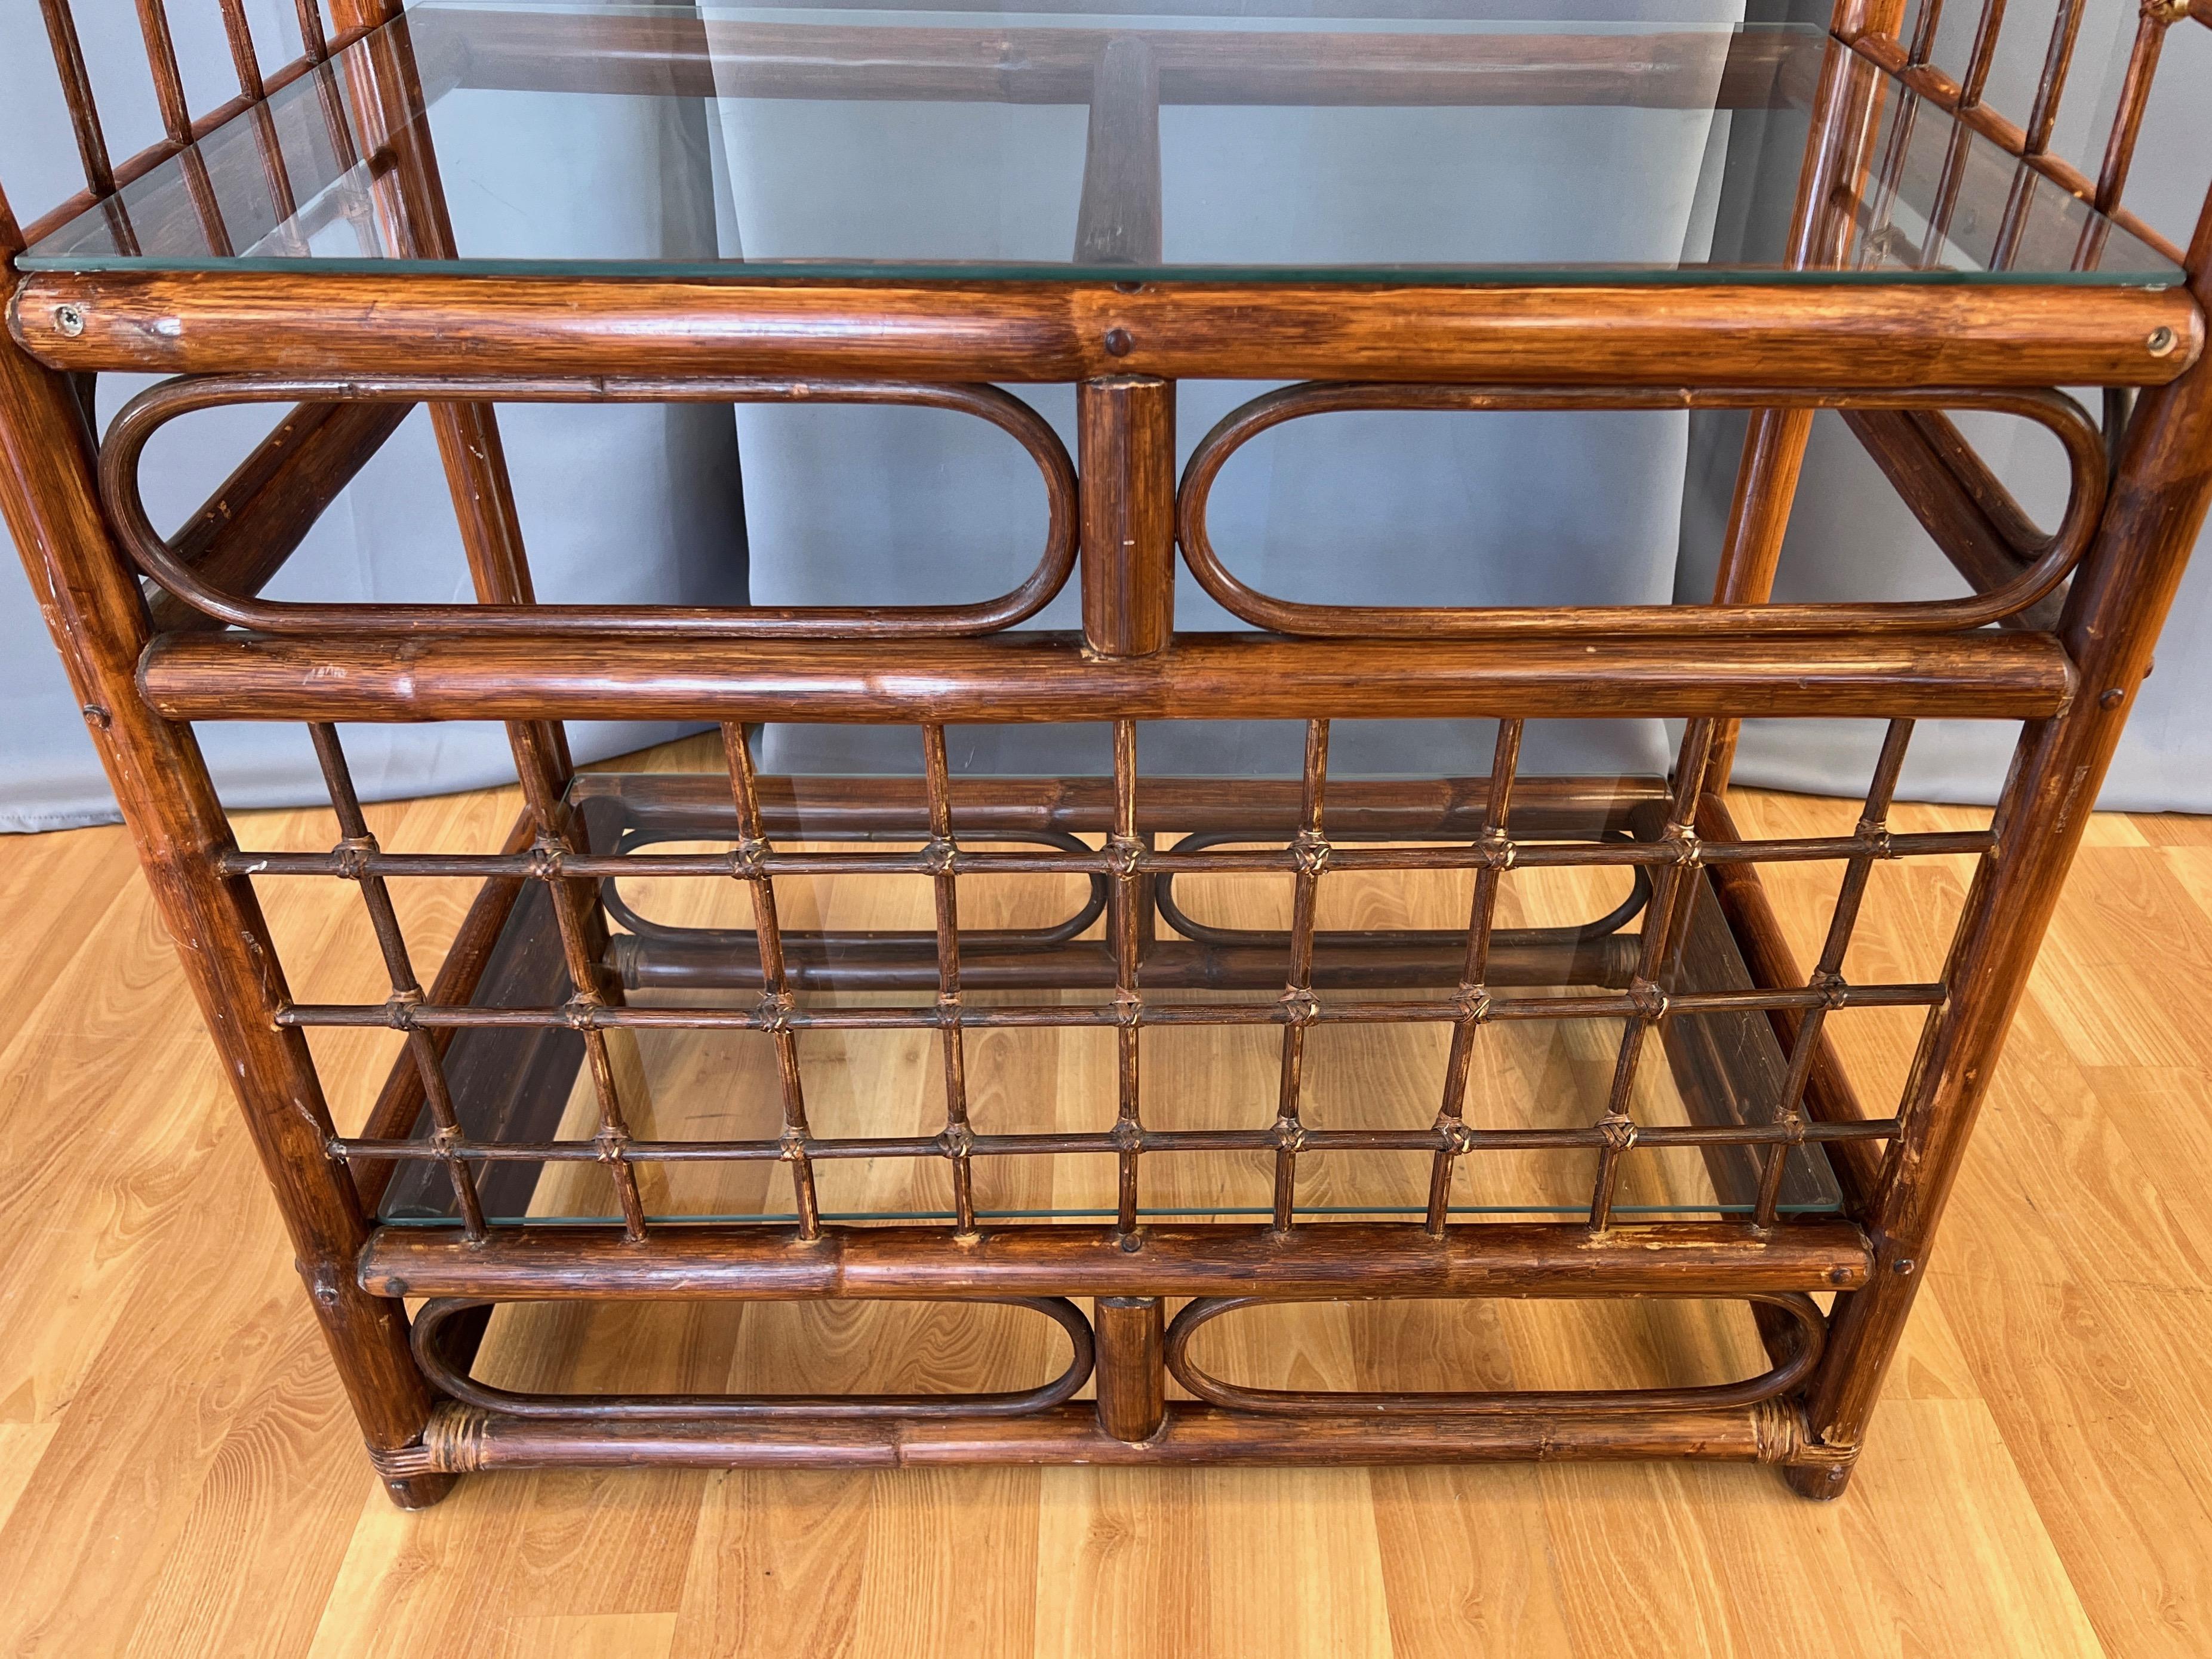 Arched-Top Stained Rattan Étagère with Three Glass Shelves, 1970s For Sale 10